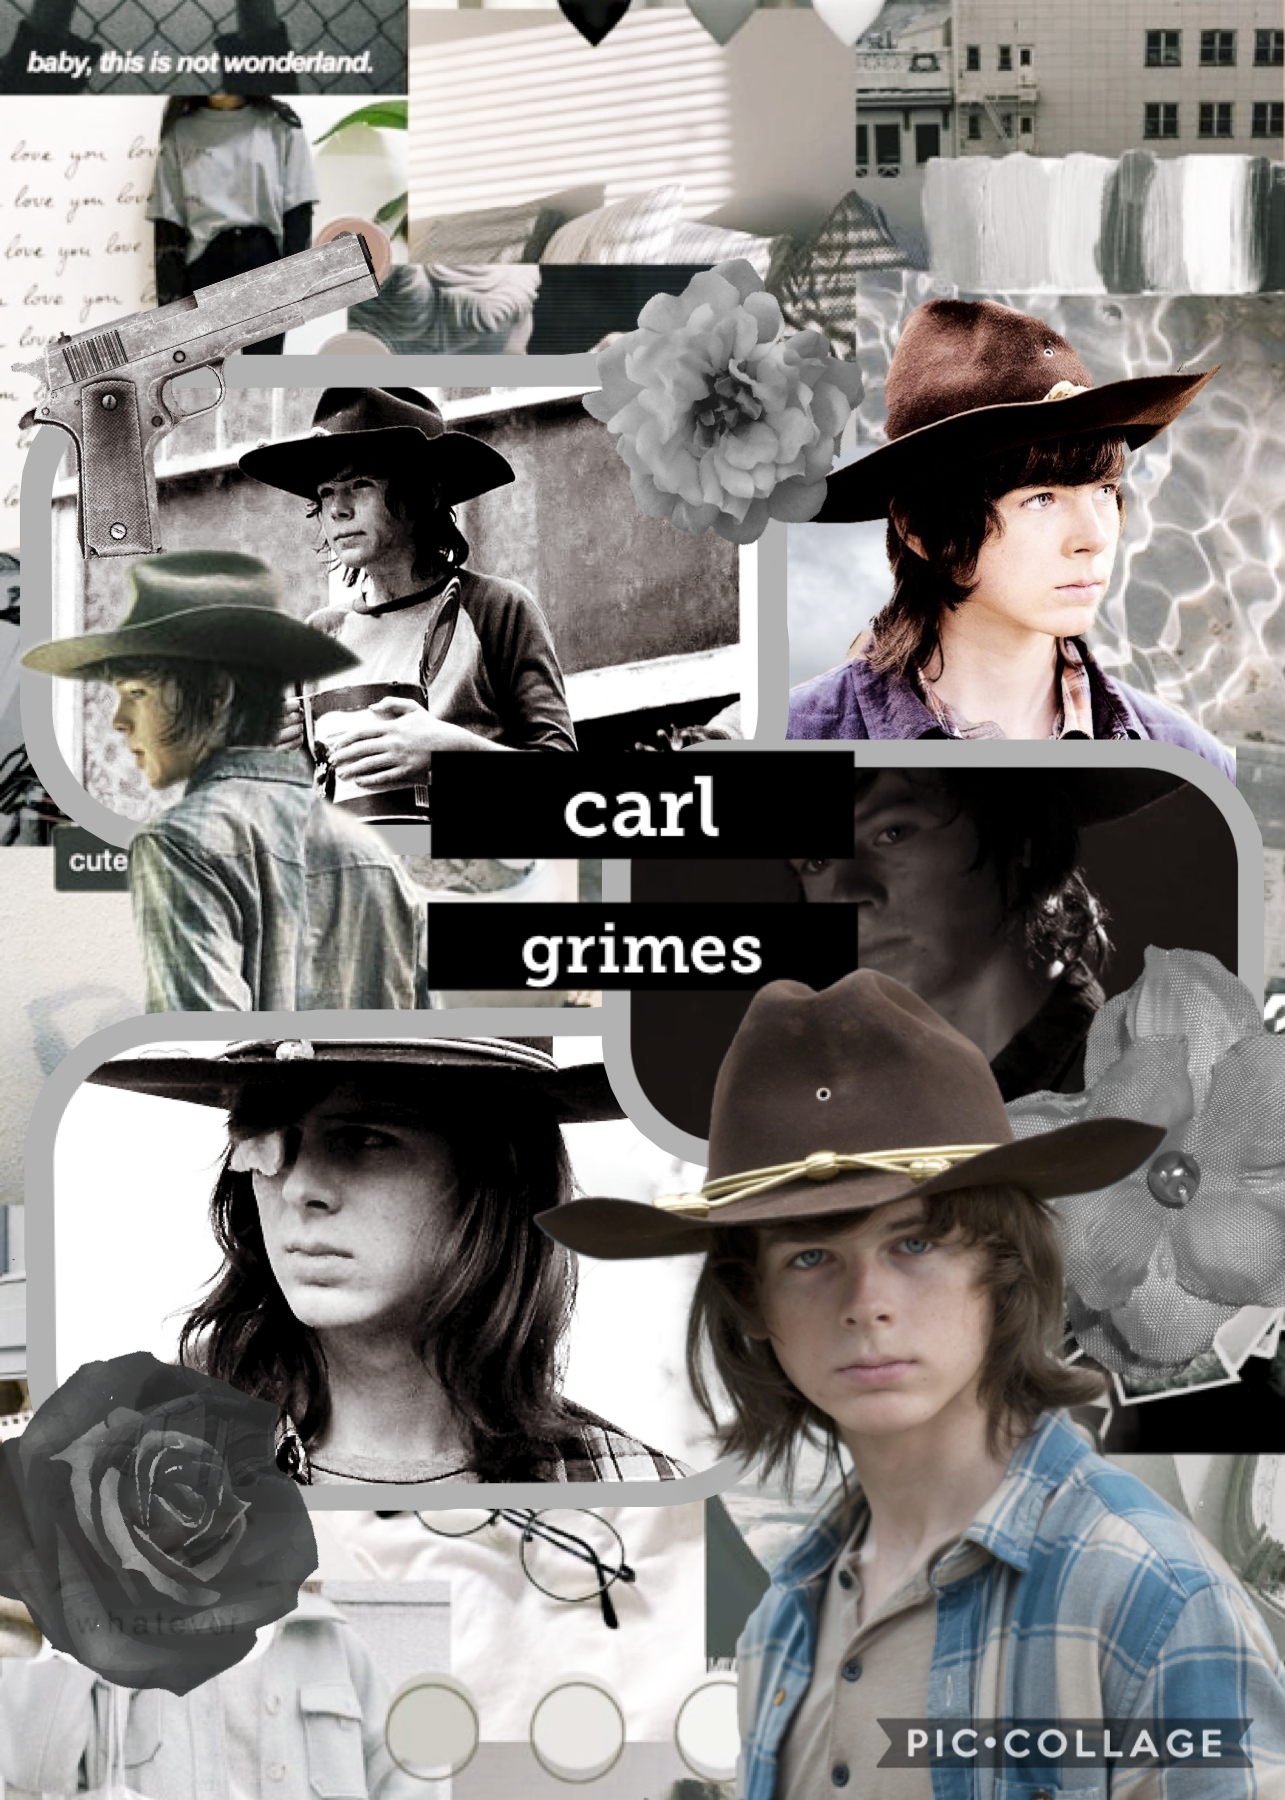 here. have a carl edit